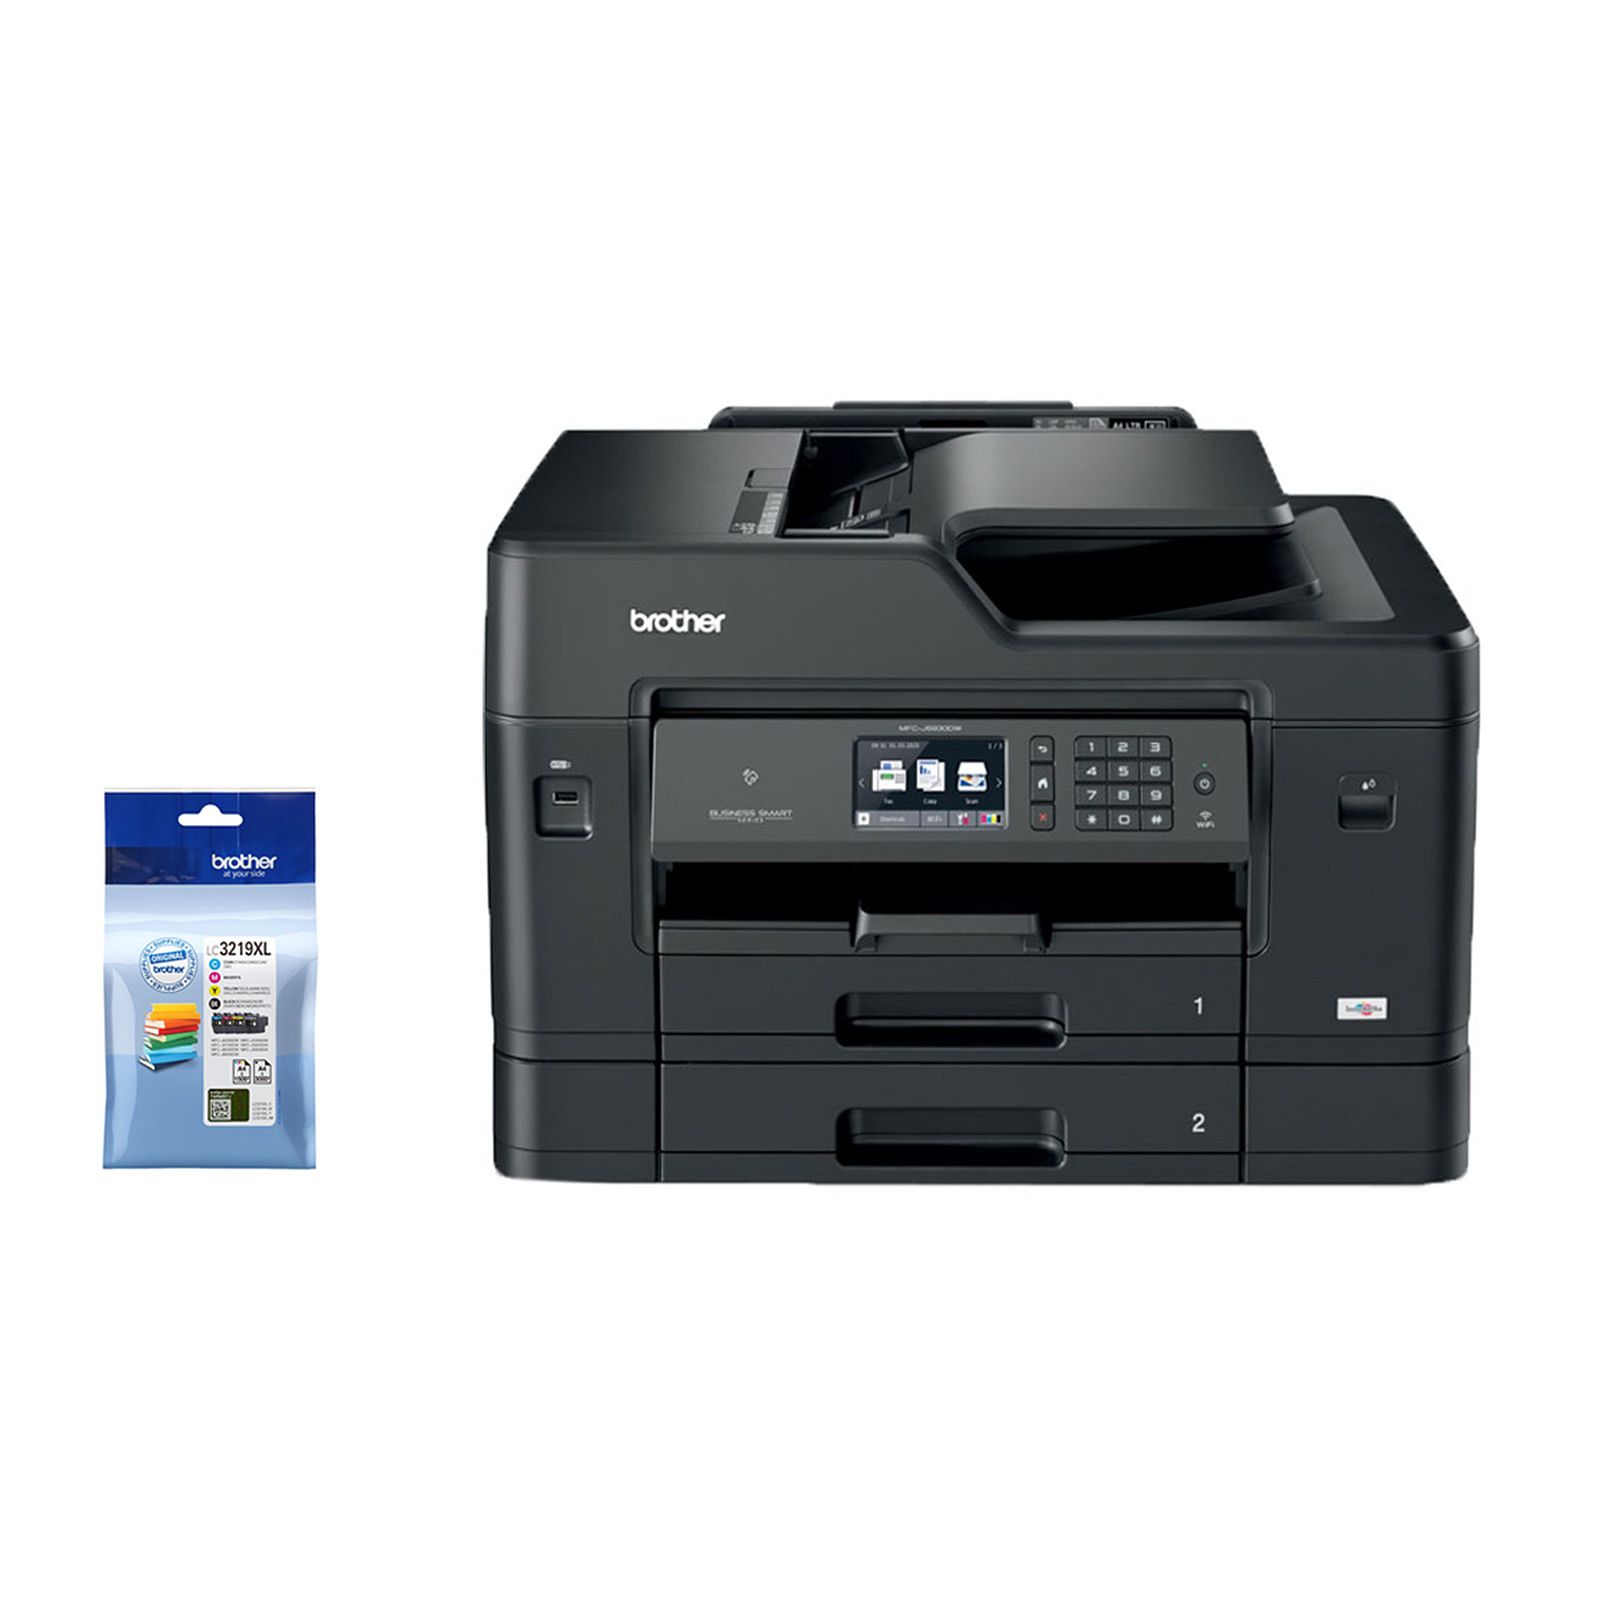 Brother MFC-J6930DW + 1x LC3219XL Value Pack - Imprimante multifonction Brother